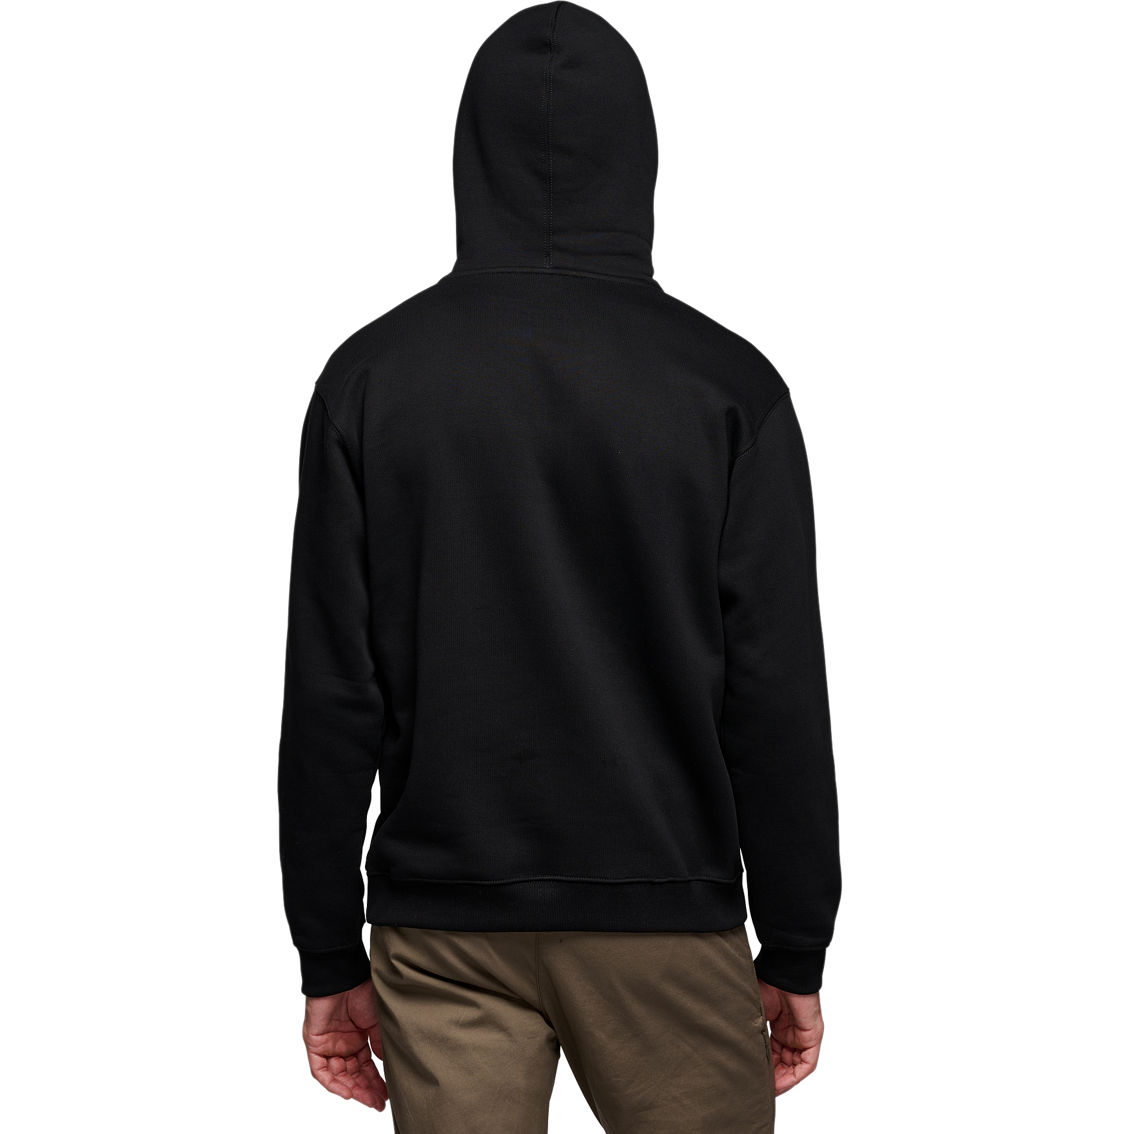 Black Diamond Equipment Chalked Up 2.0 Pullover Hoodie - Image 2 of 4